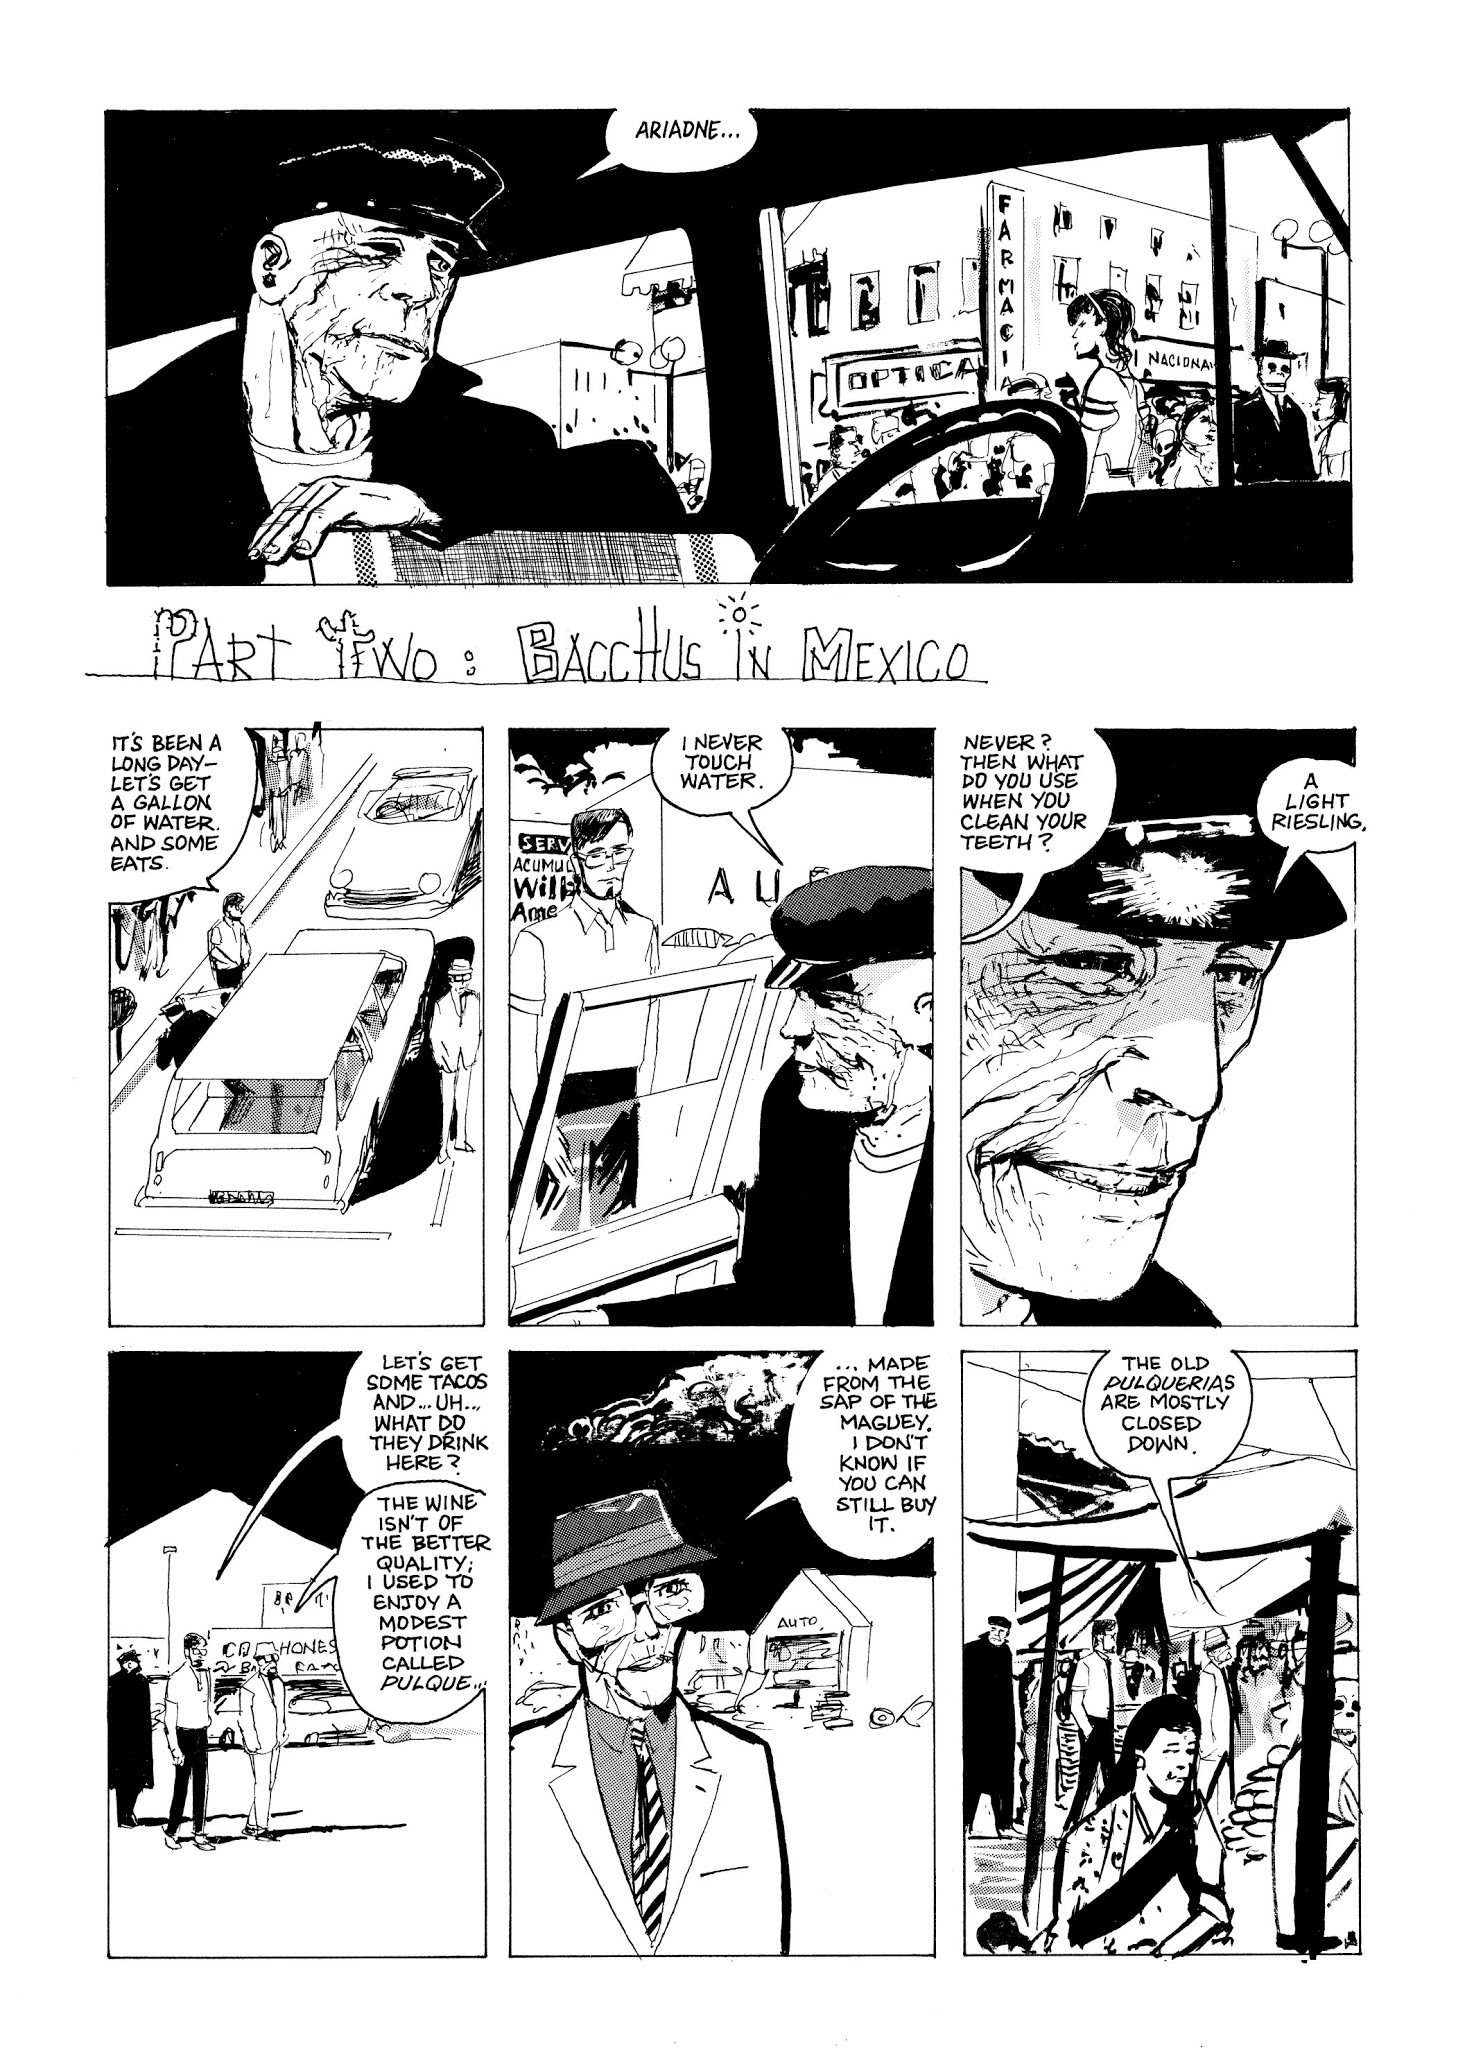 Read online Eddie Campbell's Bacchus comic -  Issue # TPB 1 - 95